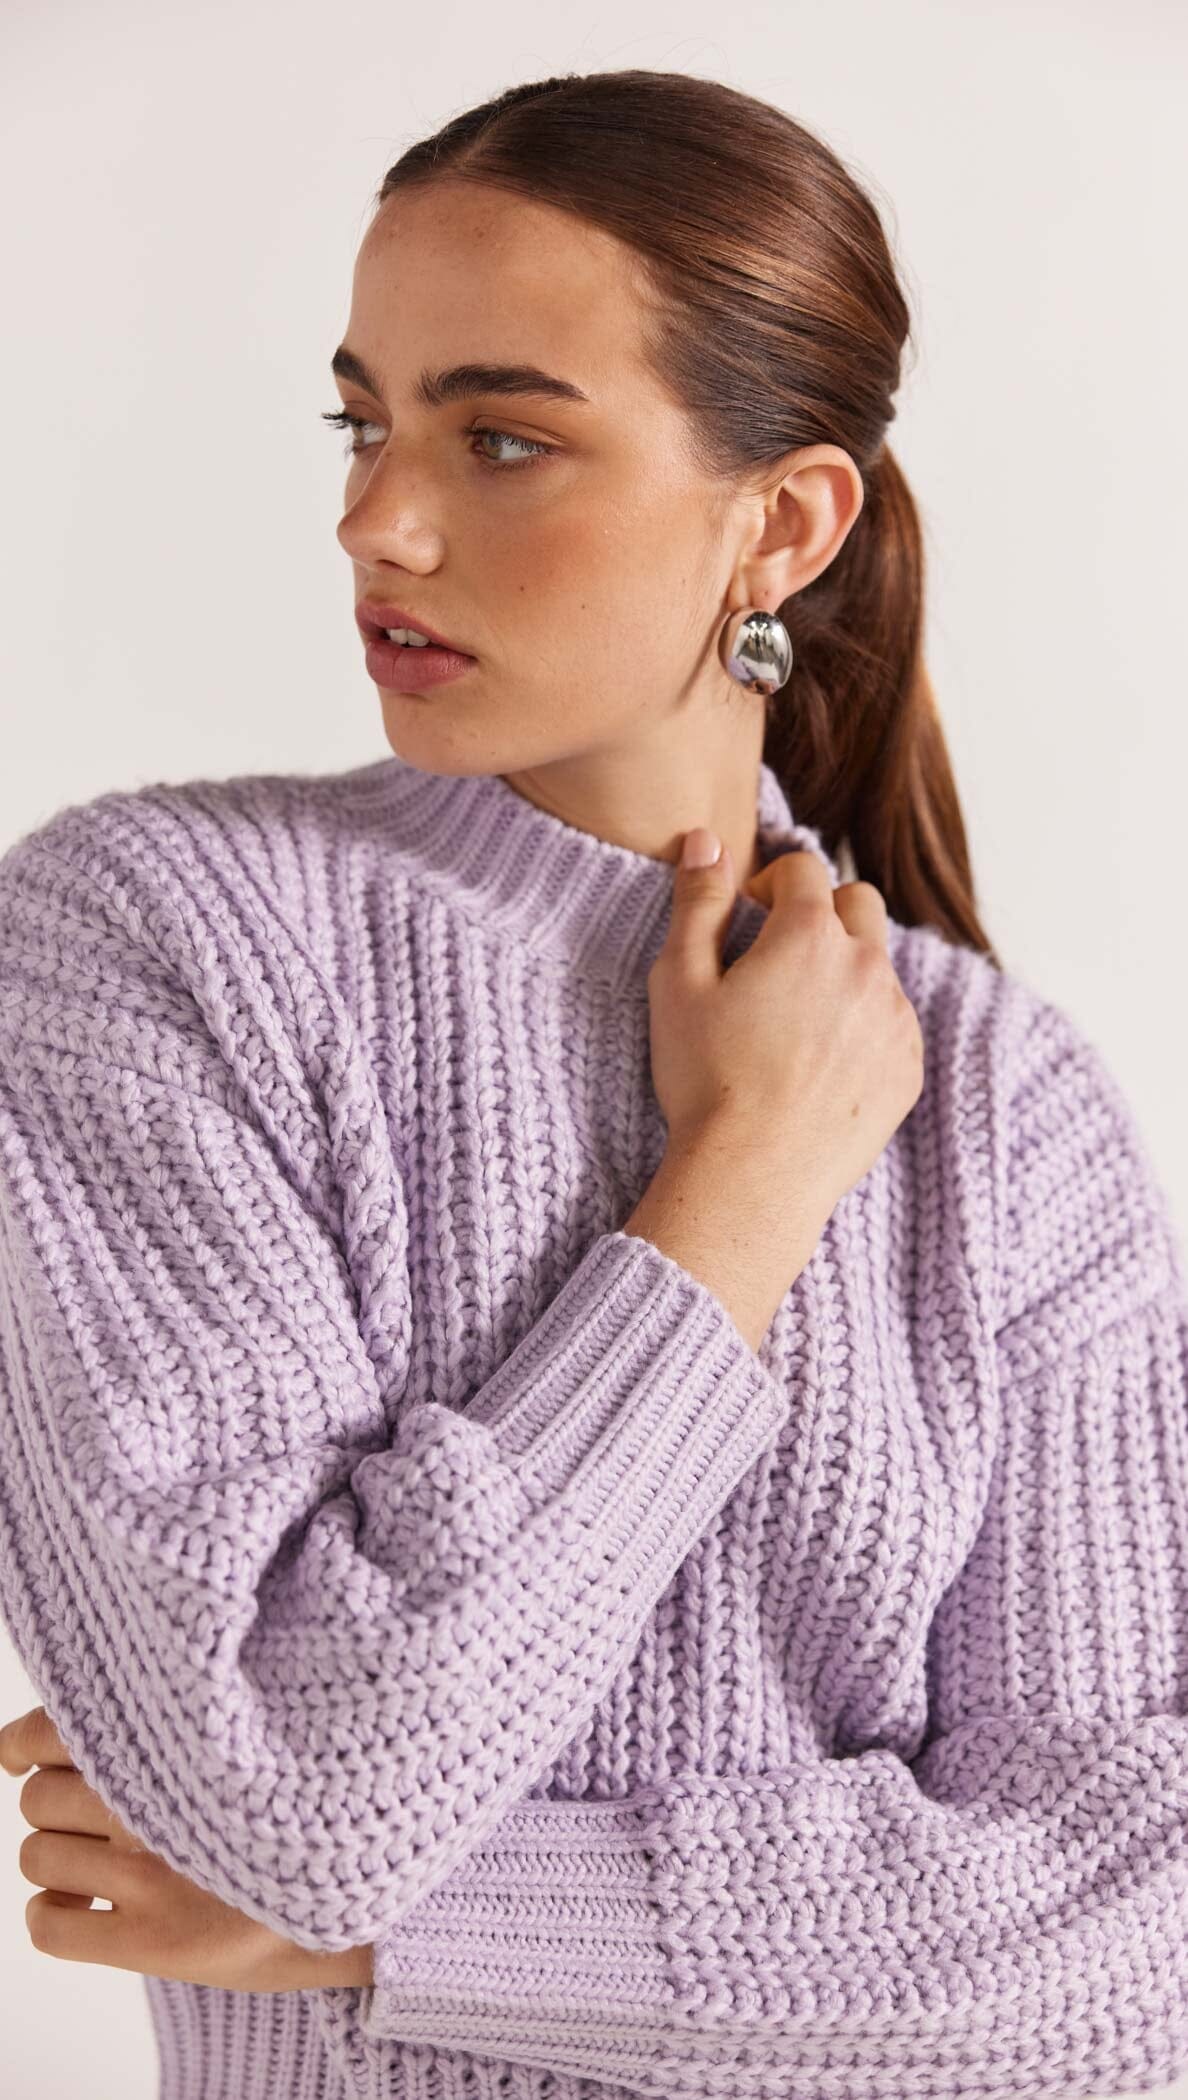 STAPLE THE LABEL - MYLES JUMPER - Lilac Womens STAPLE THE LABEL